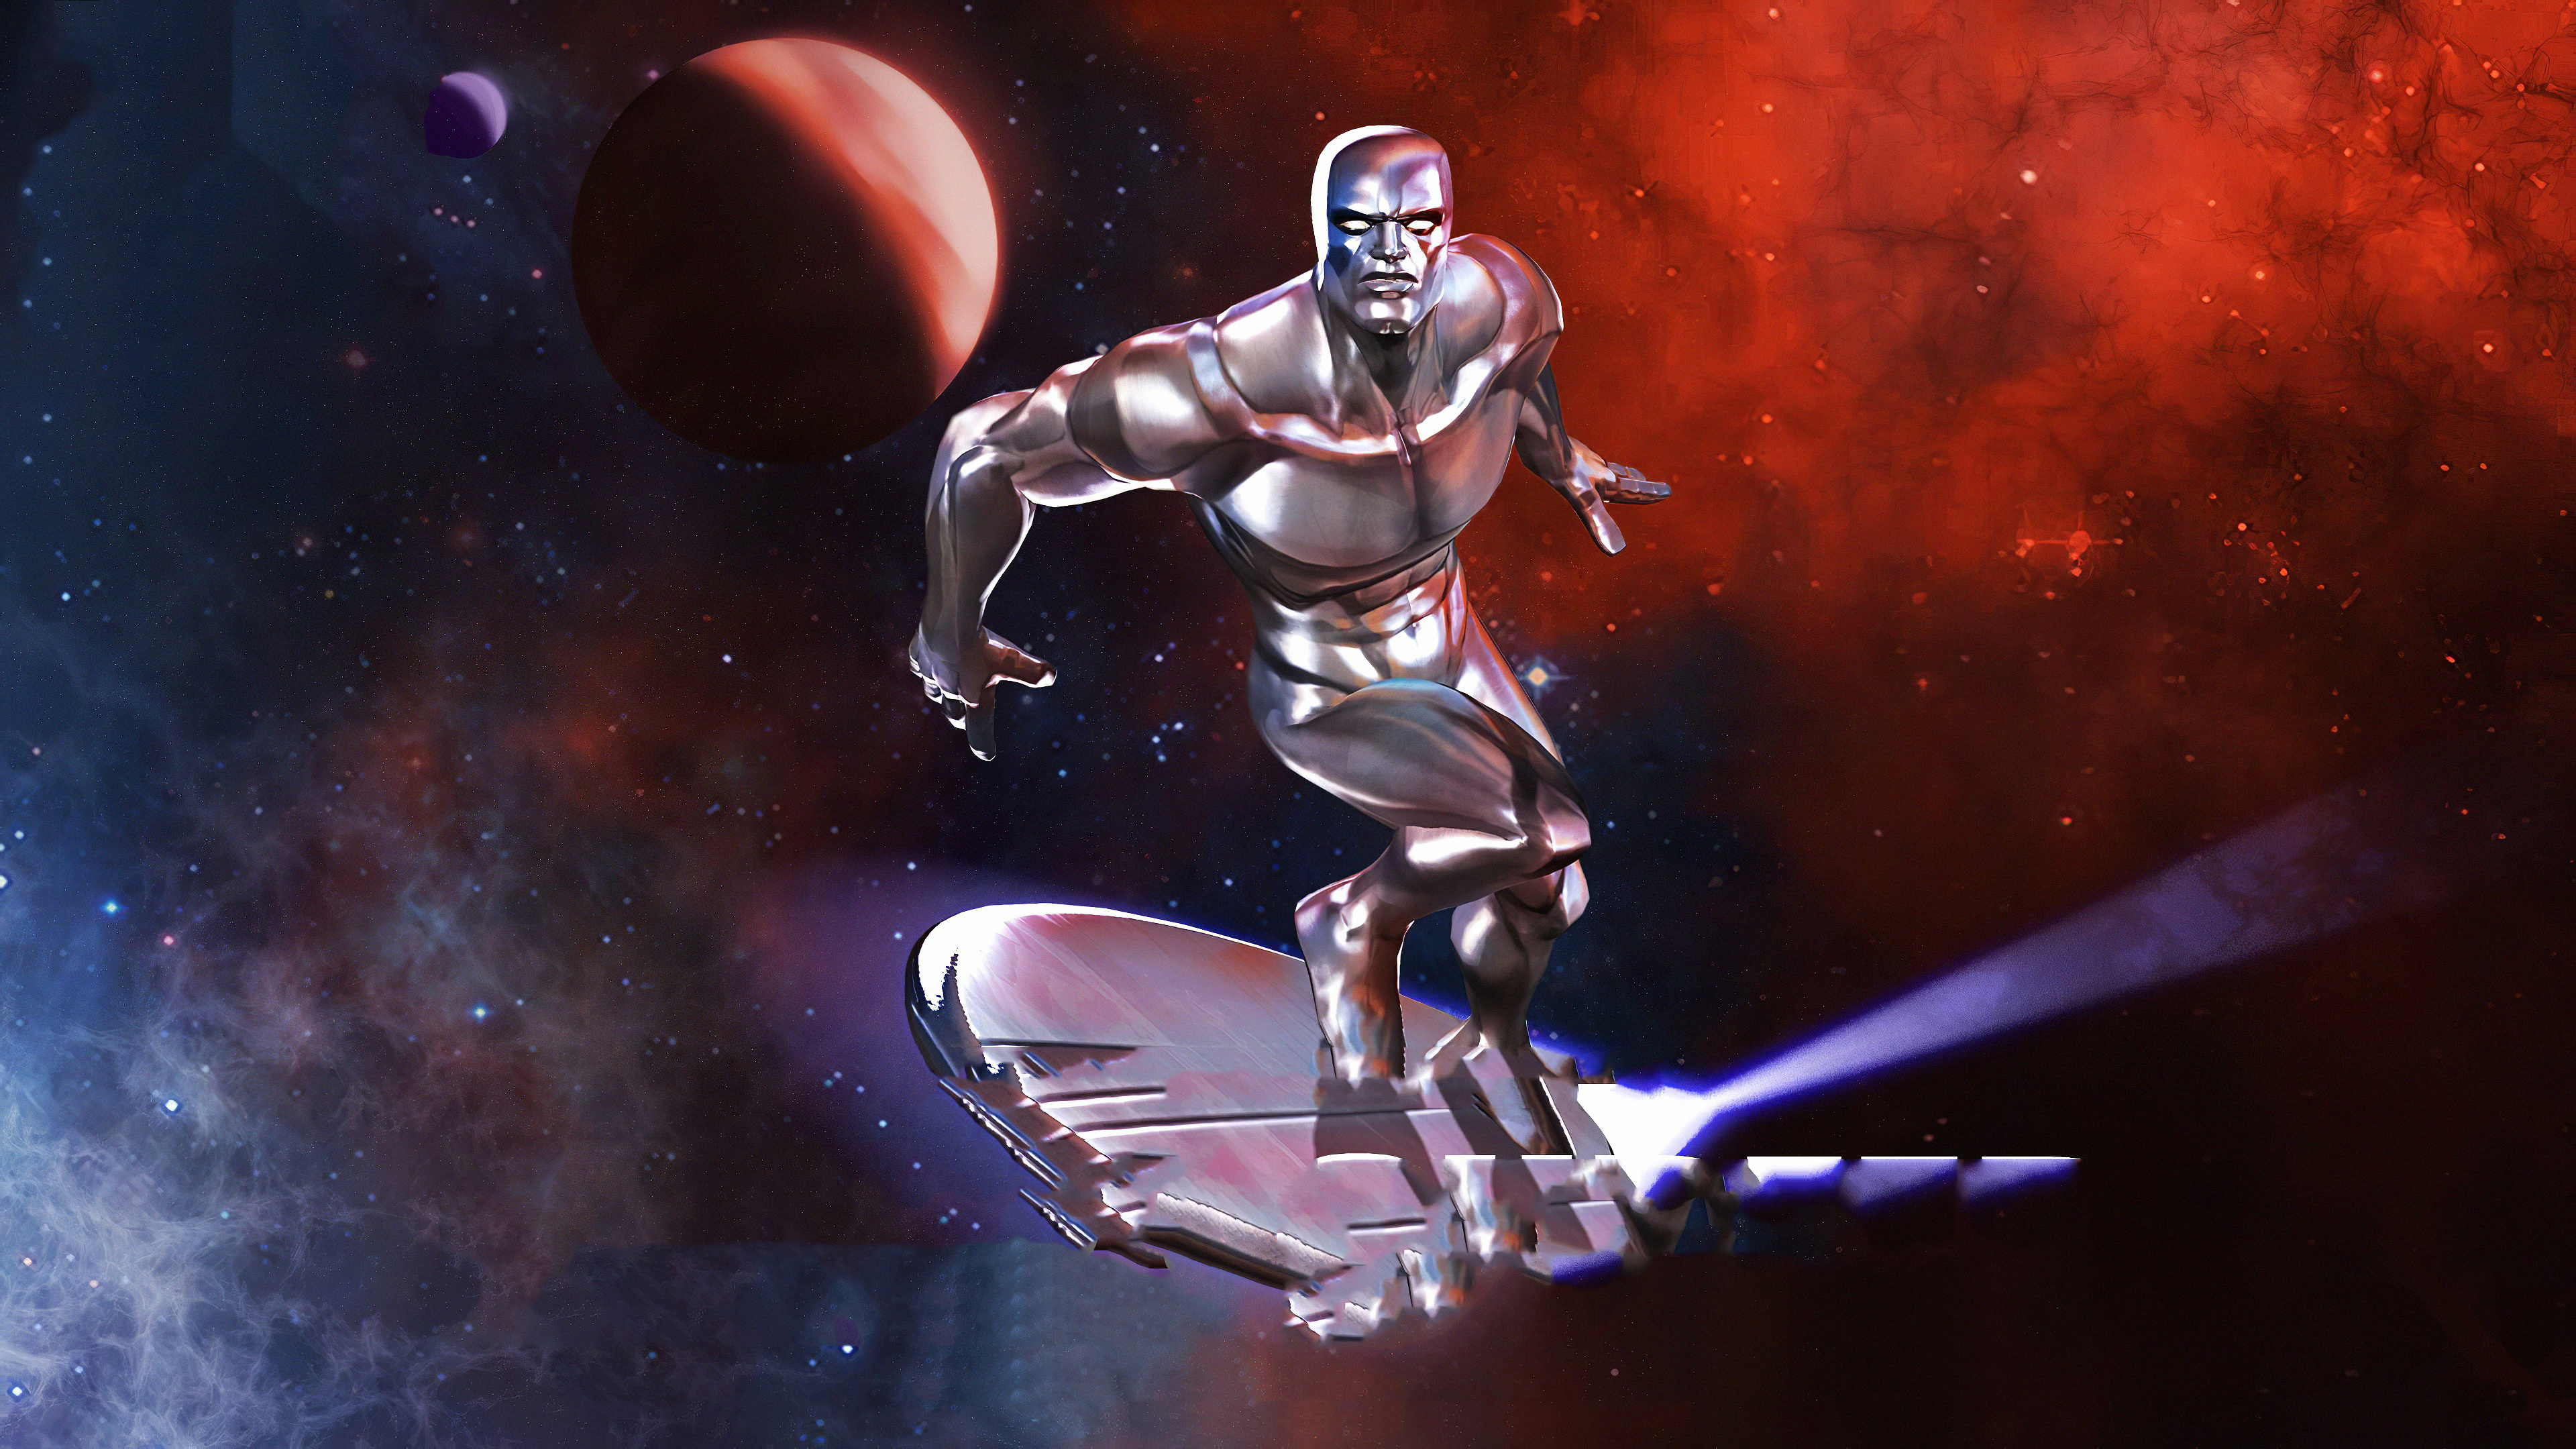 Silver Surfer Contest of Champions, 4K game wallpapers, 3840x2160 4K Desktop